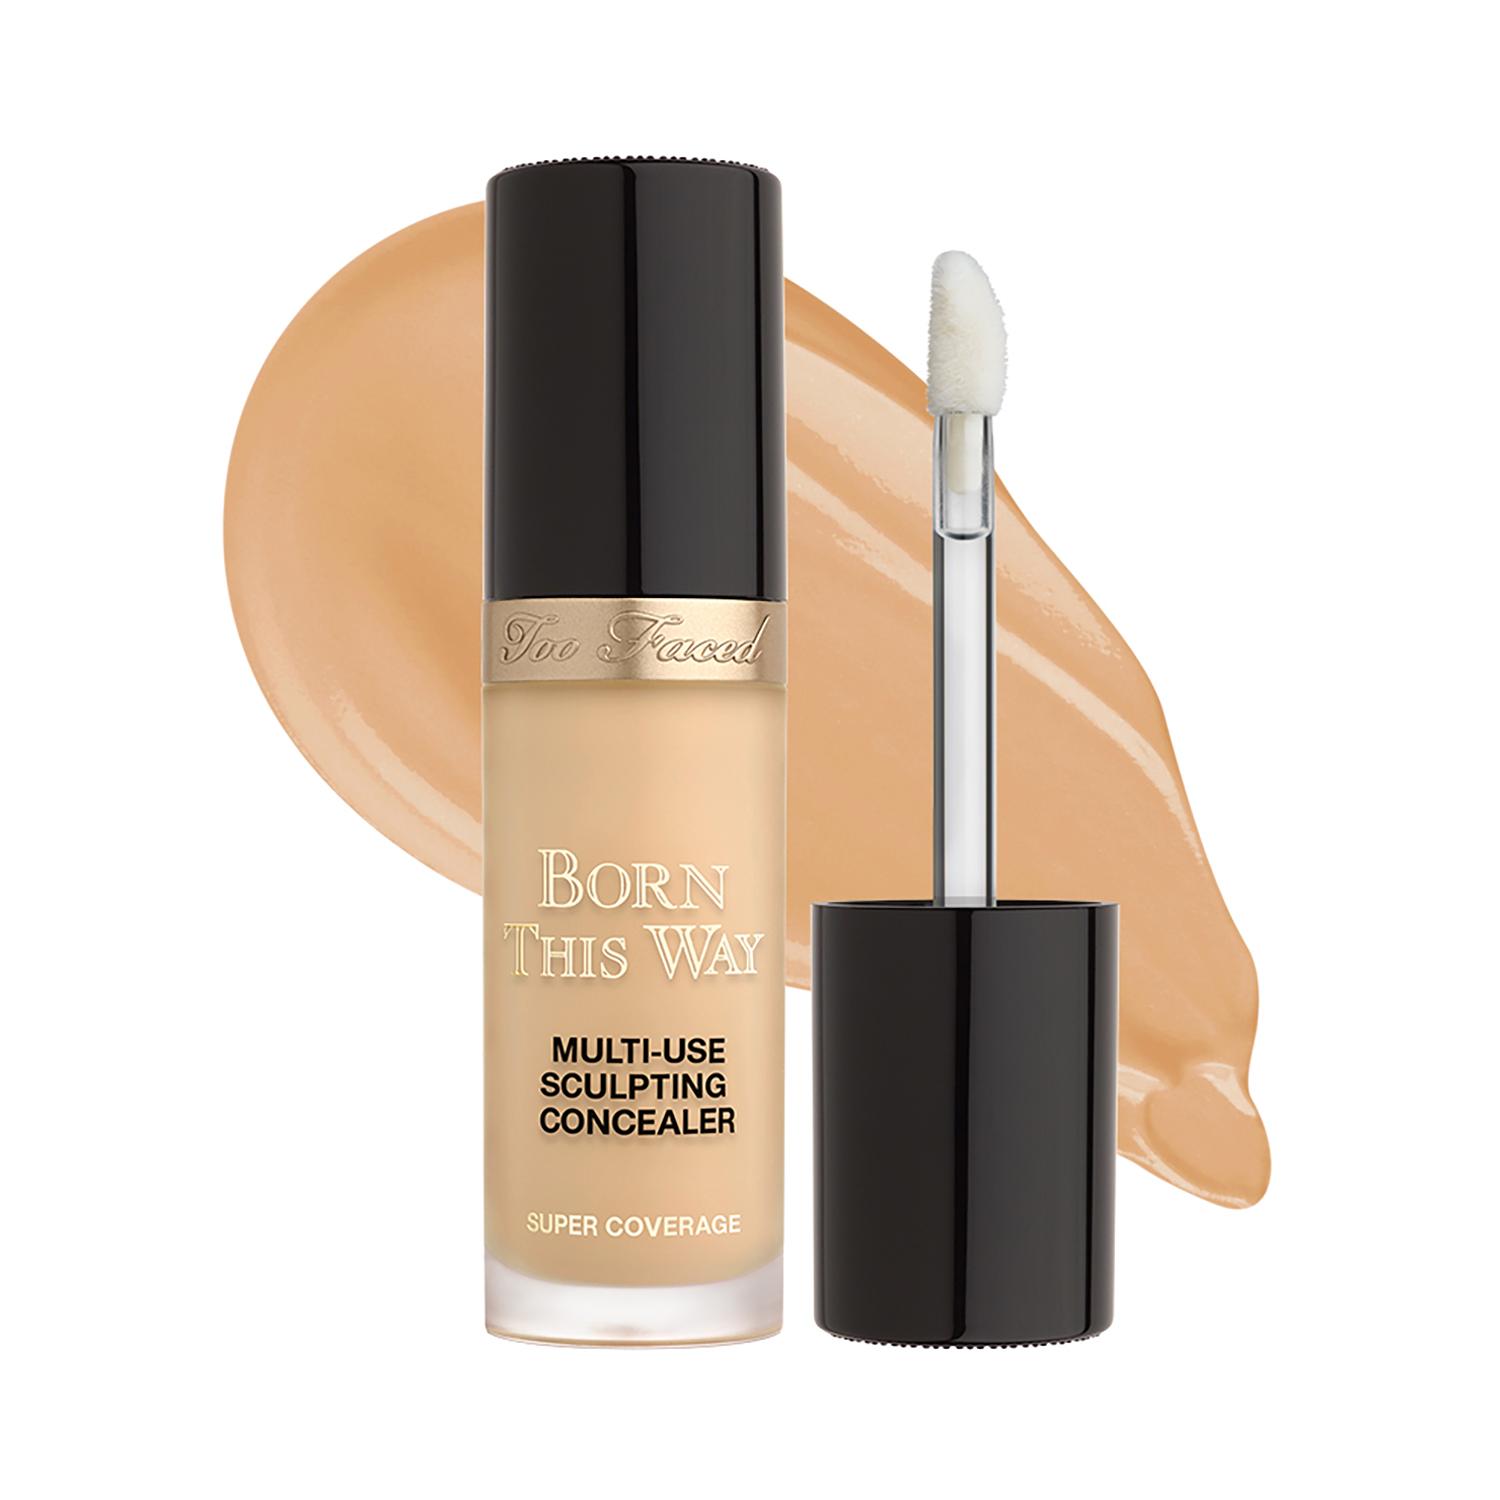 Too Faced | Too Faced Born This Way Super Coverage Multi Use Sculpting Concealer- Golden Beige (13.5ml)